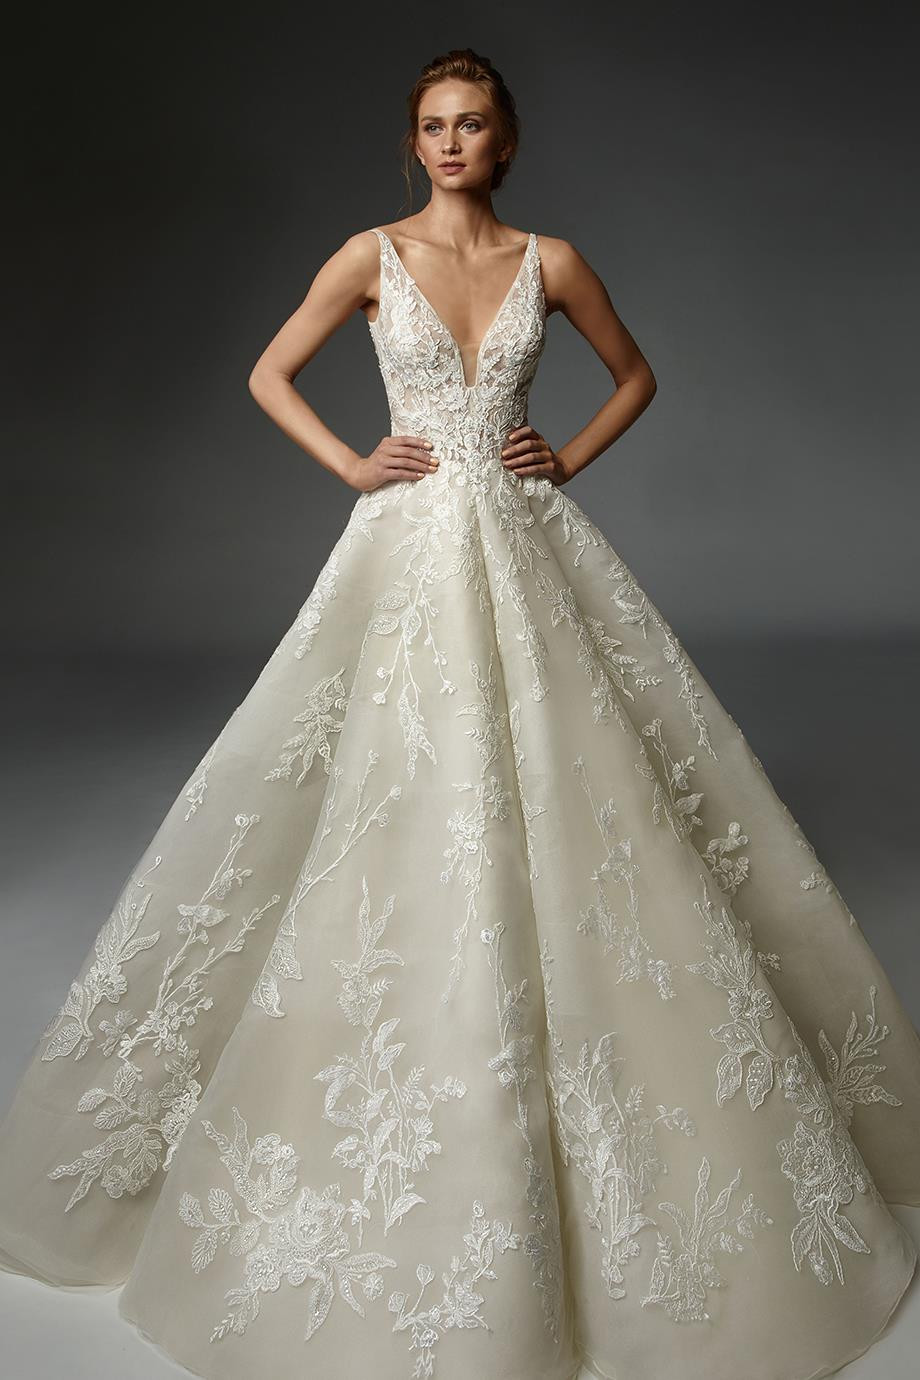 Lace Wedding Dresses & Bridal Gowns - Page 3 | hitched.co.uk